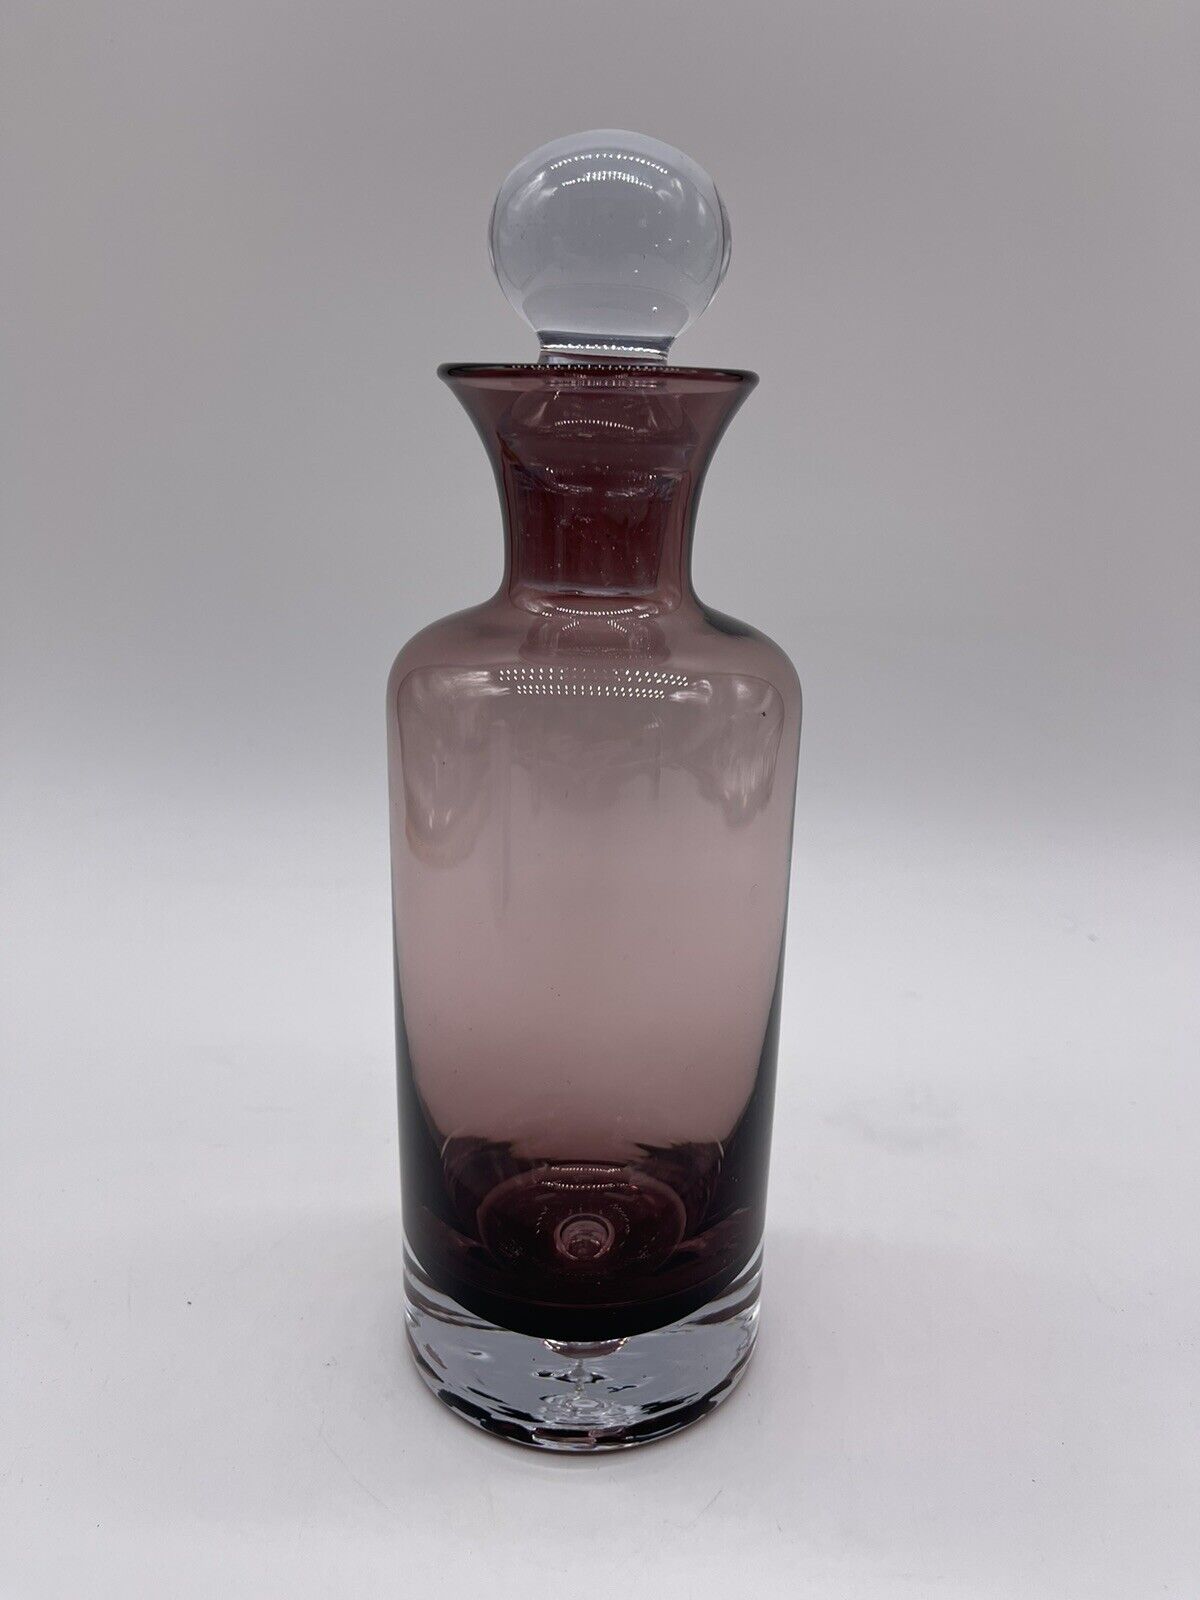 VTG Europe Liquor Decanter Purple Amethyst Glass With Stopper Controlled Bubble